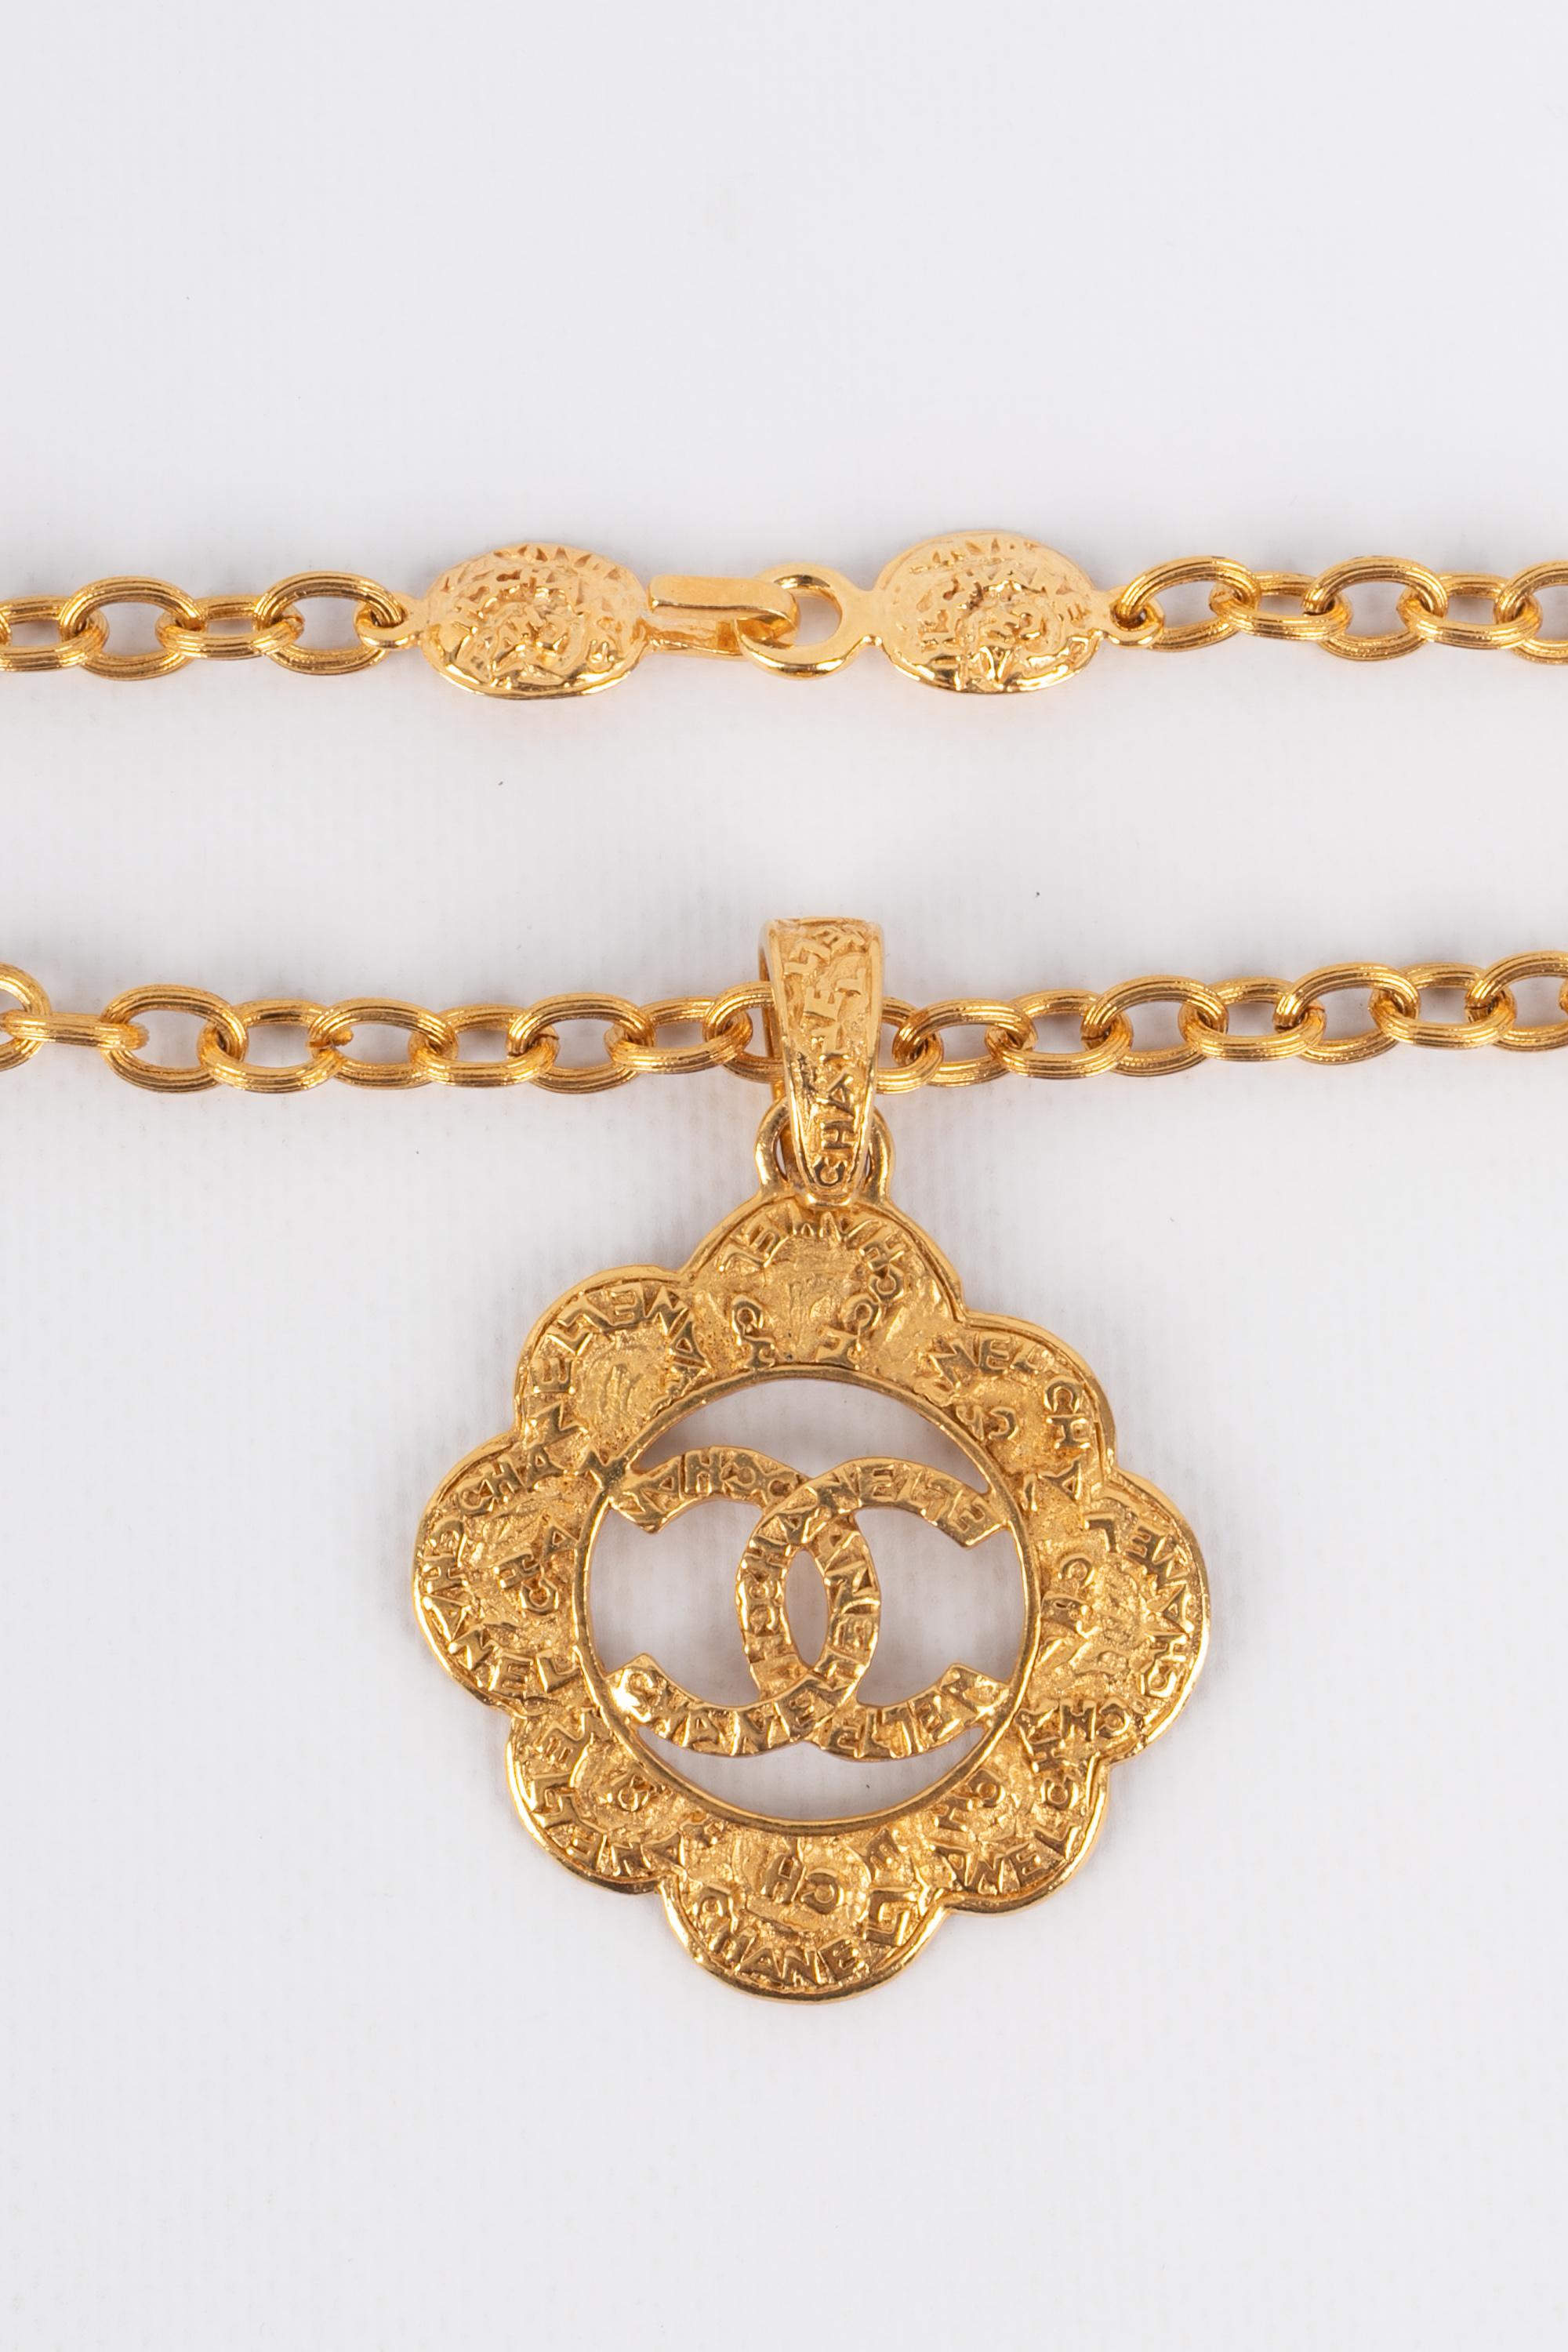 Chanel necklace Fall 1995 2